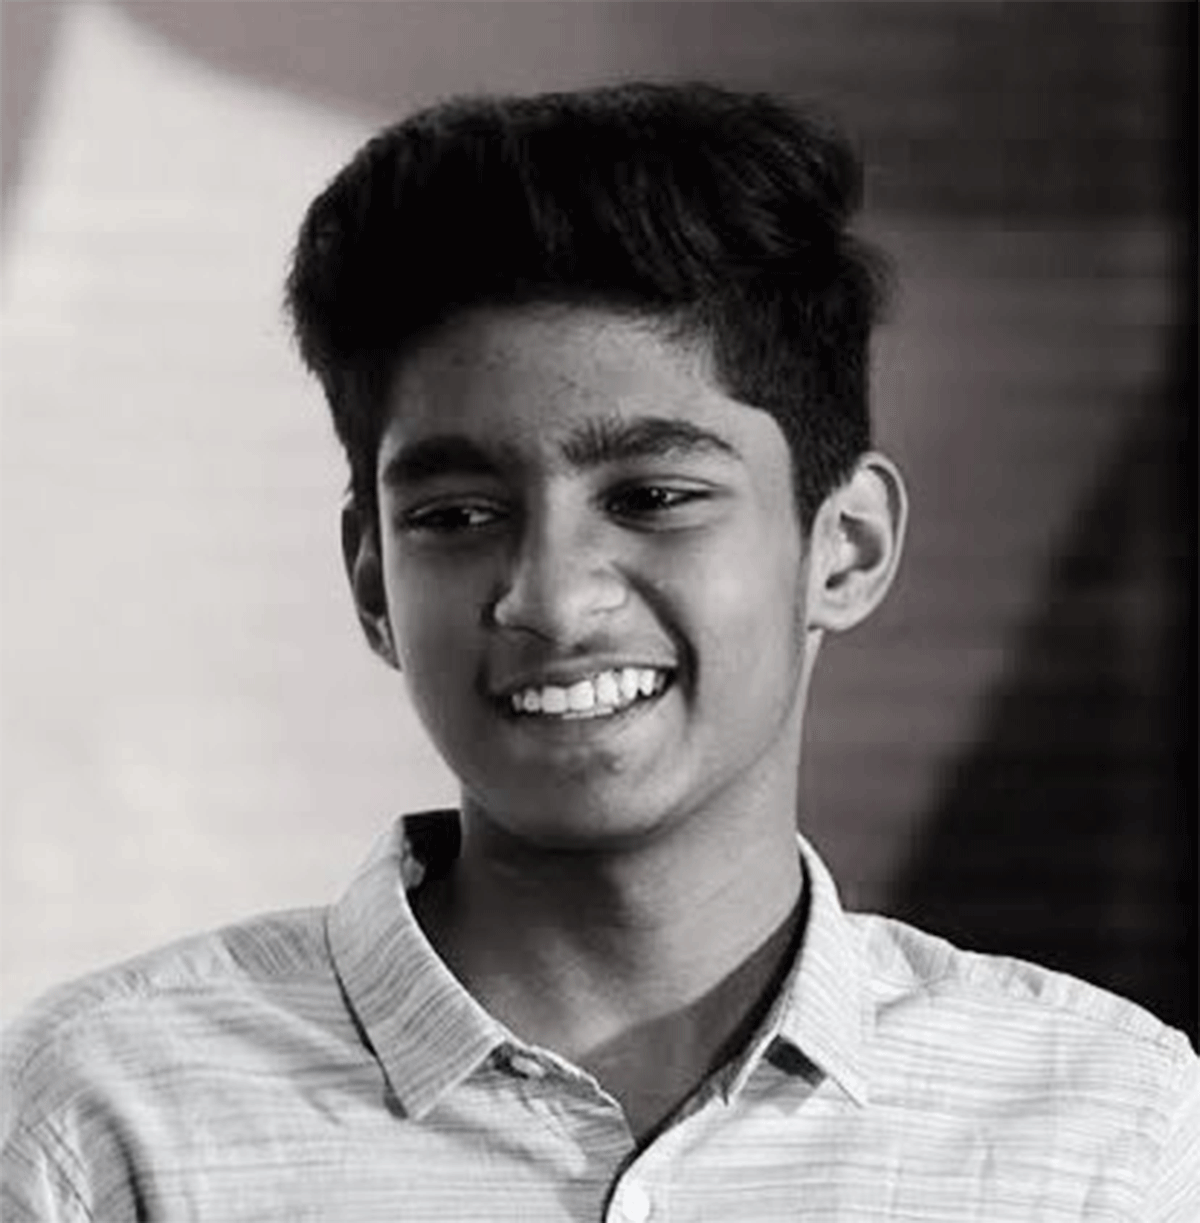 Teenager Deenadayalan Vishwa died in a road accident, ahead of the 83rd Senior National Table Tennis Championship